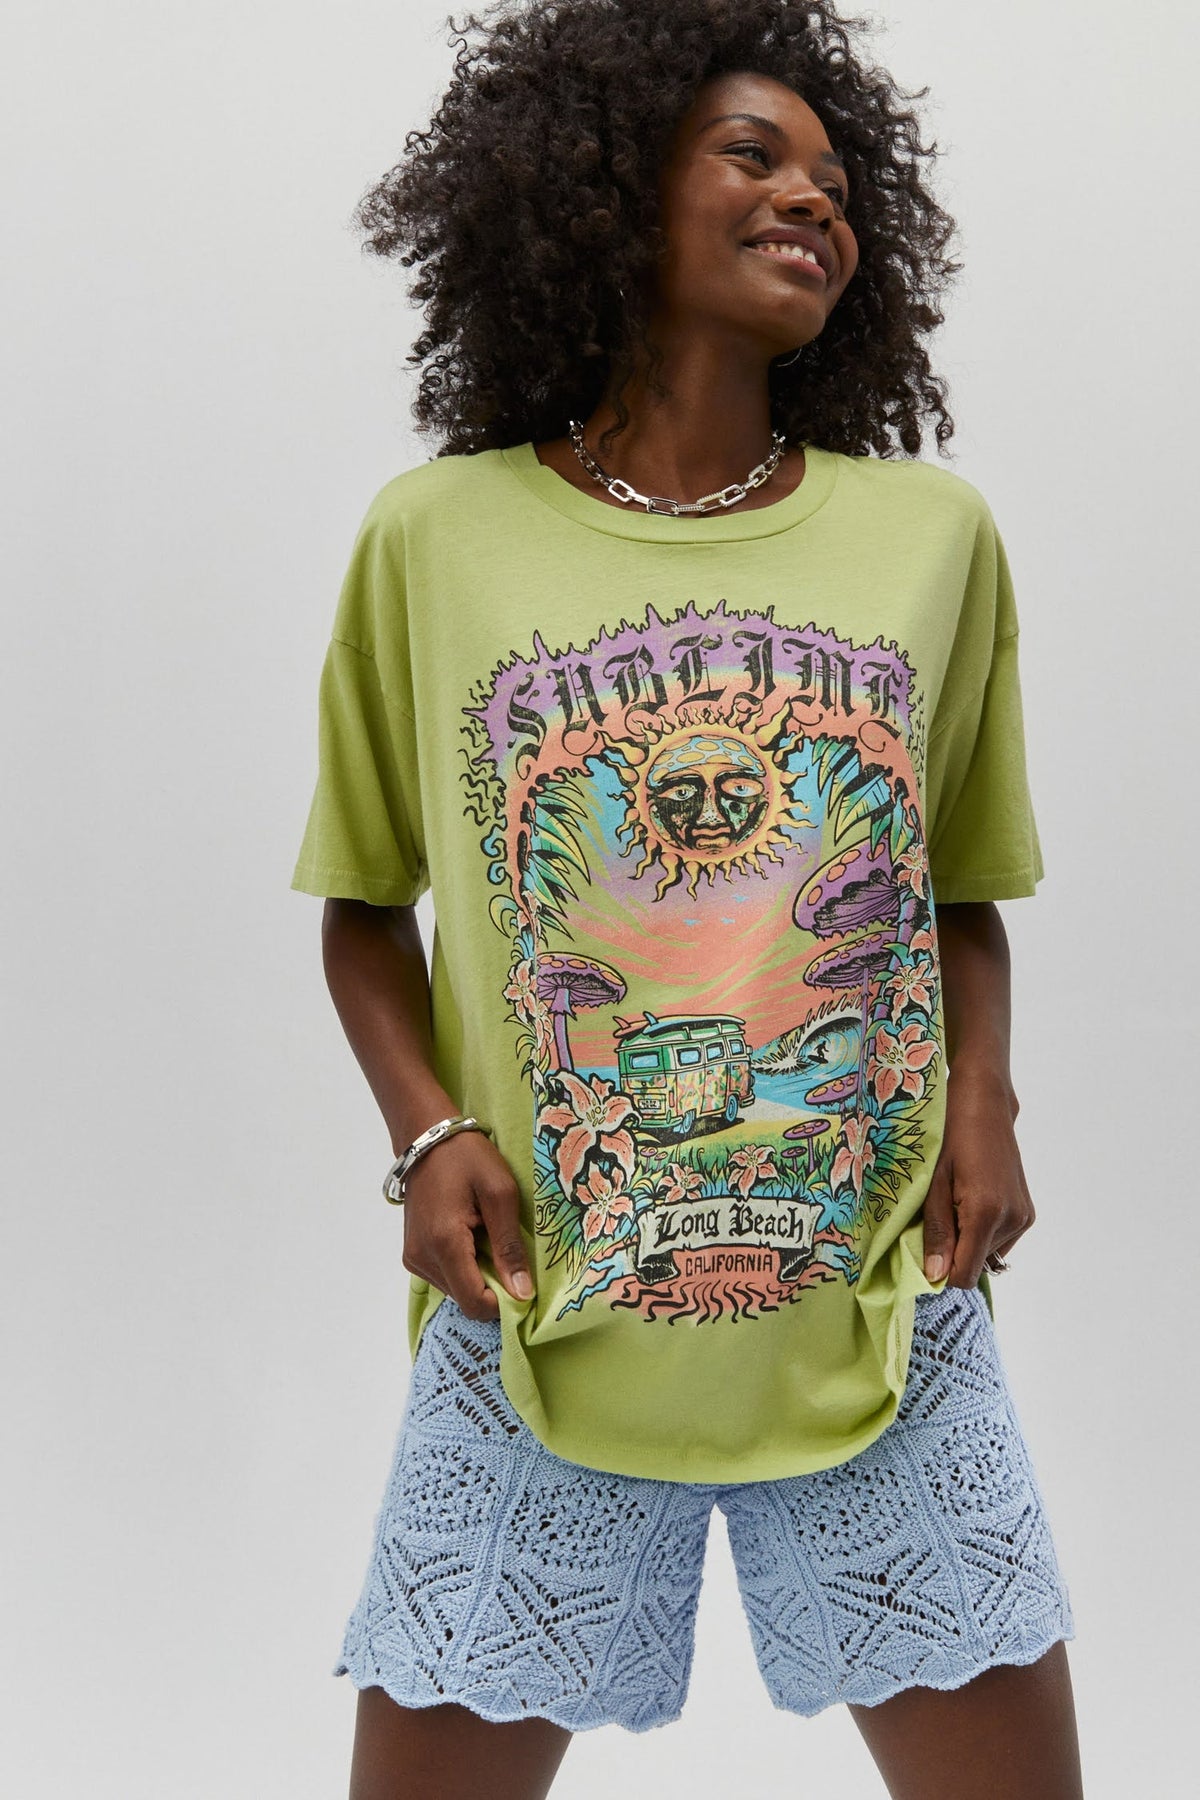 Daydreamer Sublime LBC Day Trip Oversize Merch Band Tee